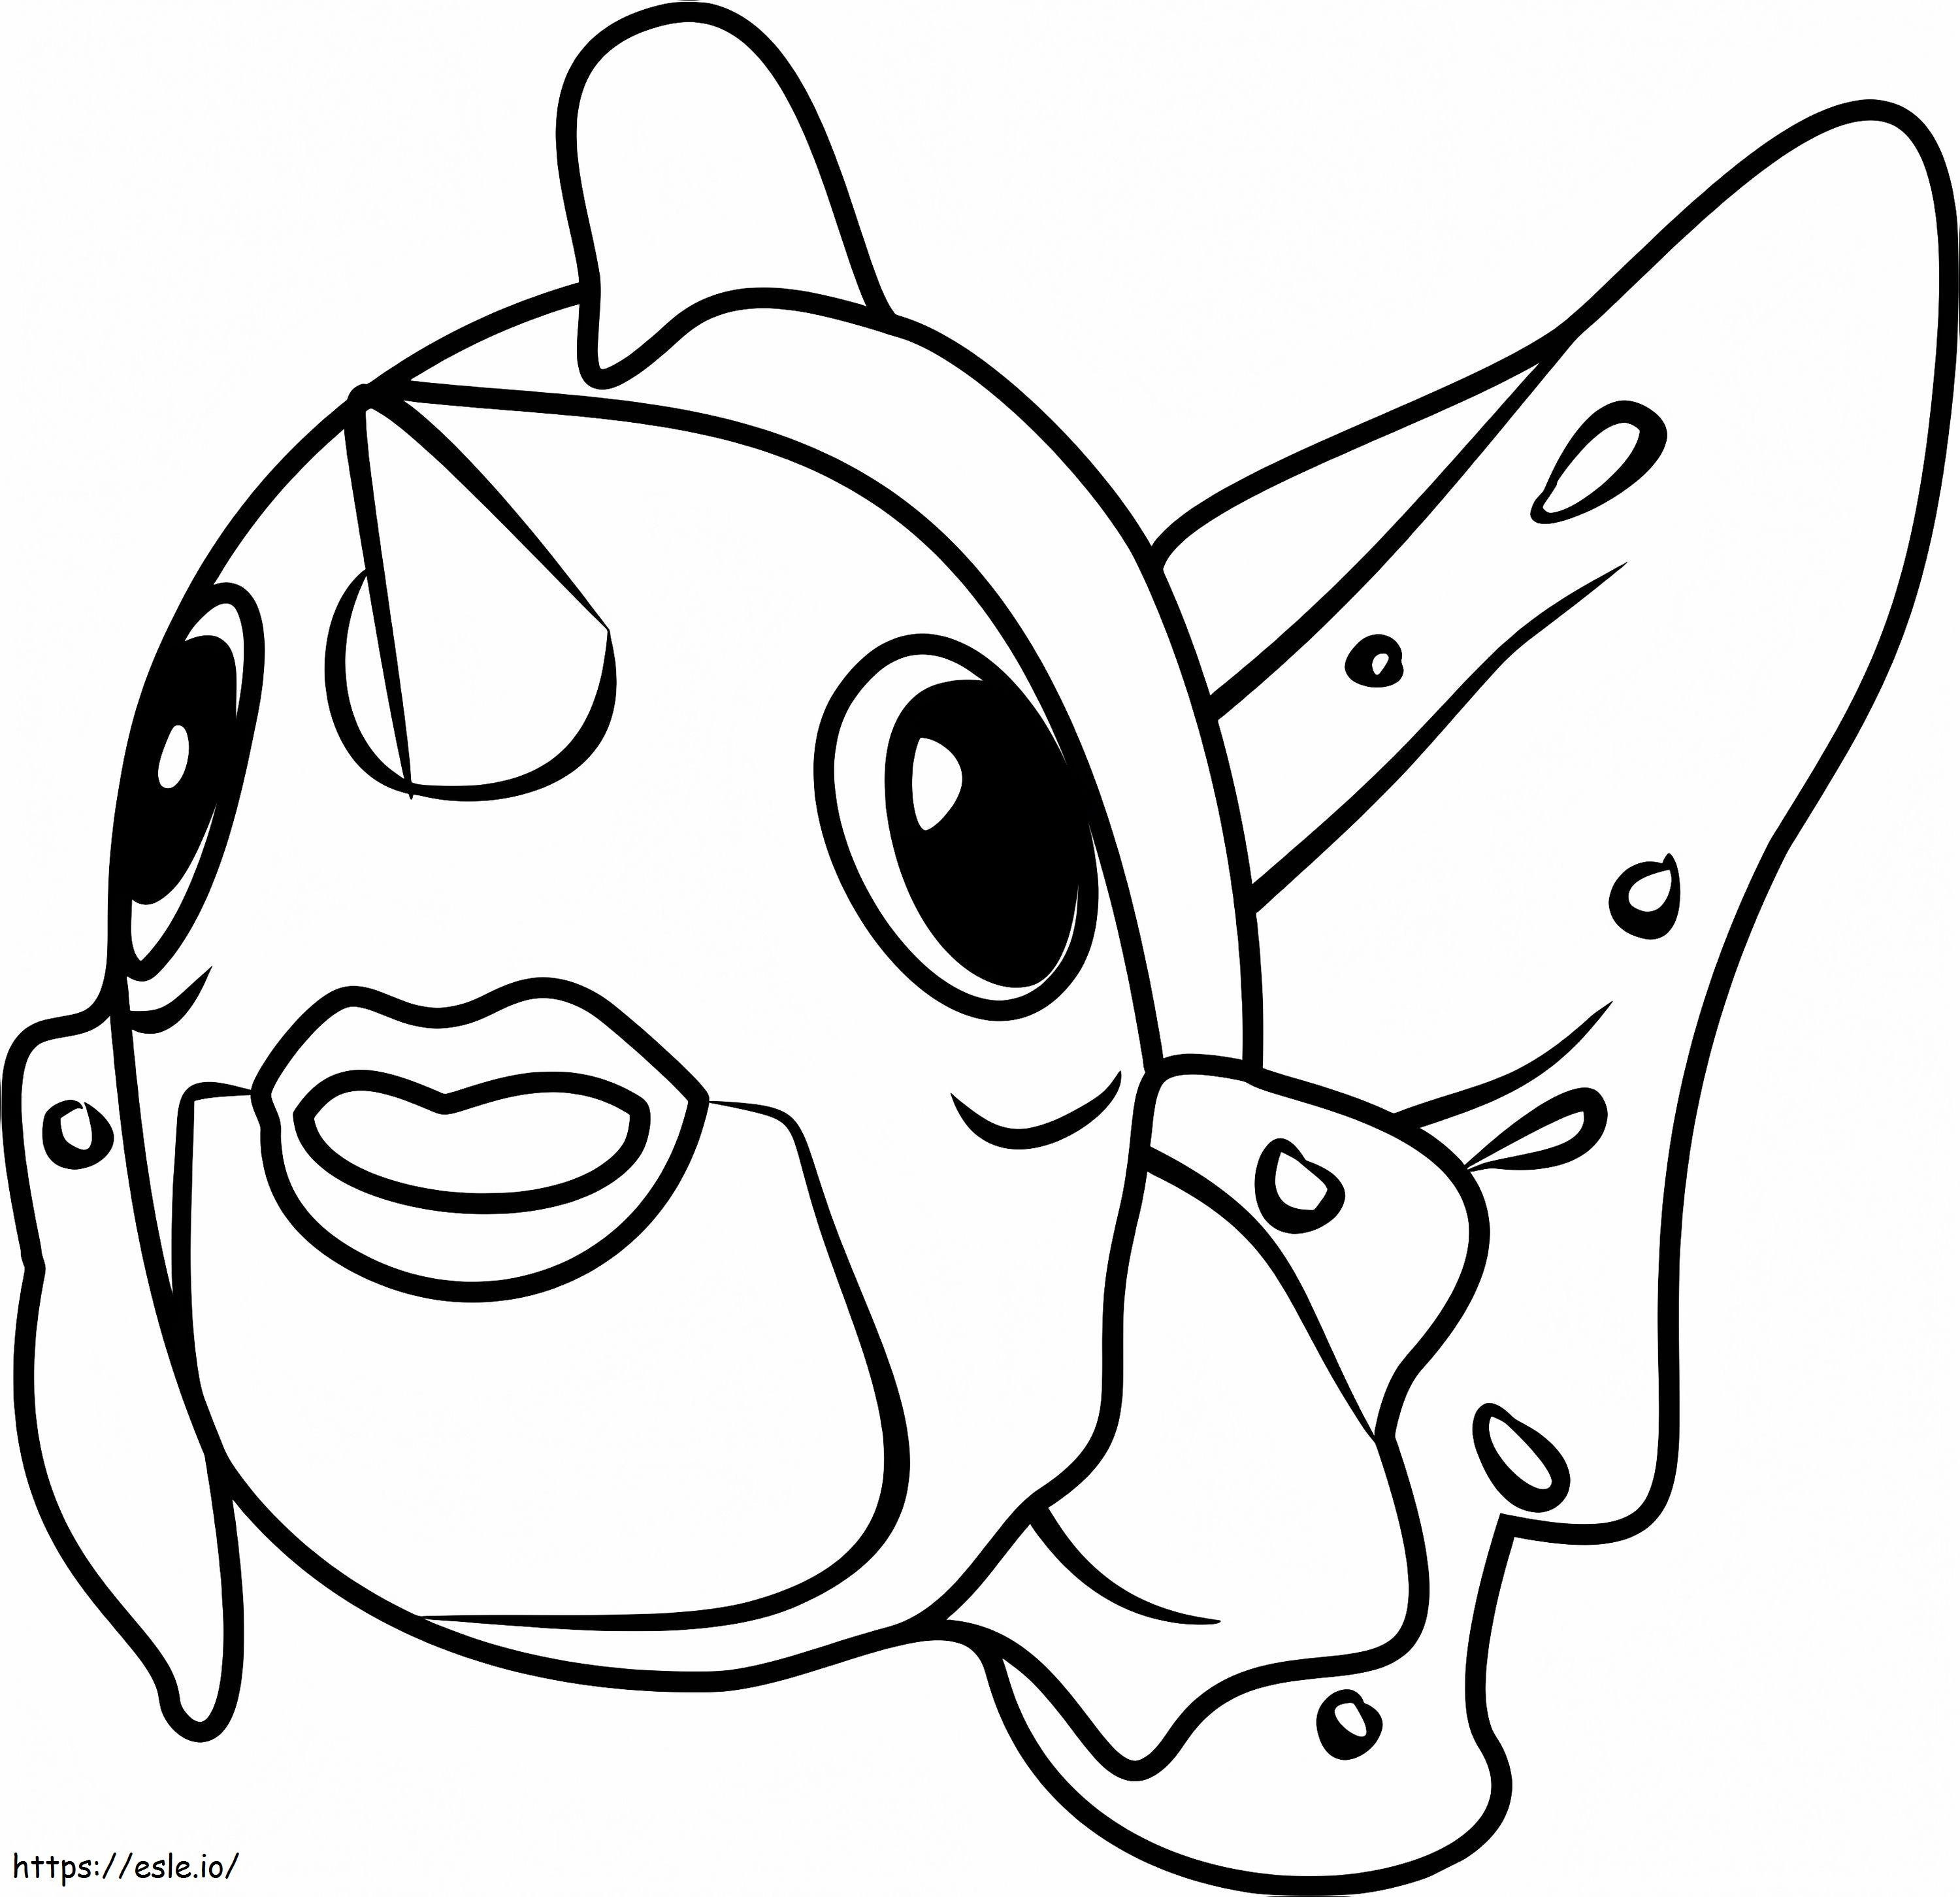 1530326473 Seaking Pokemon Go1 coloring page